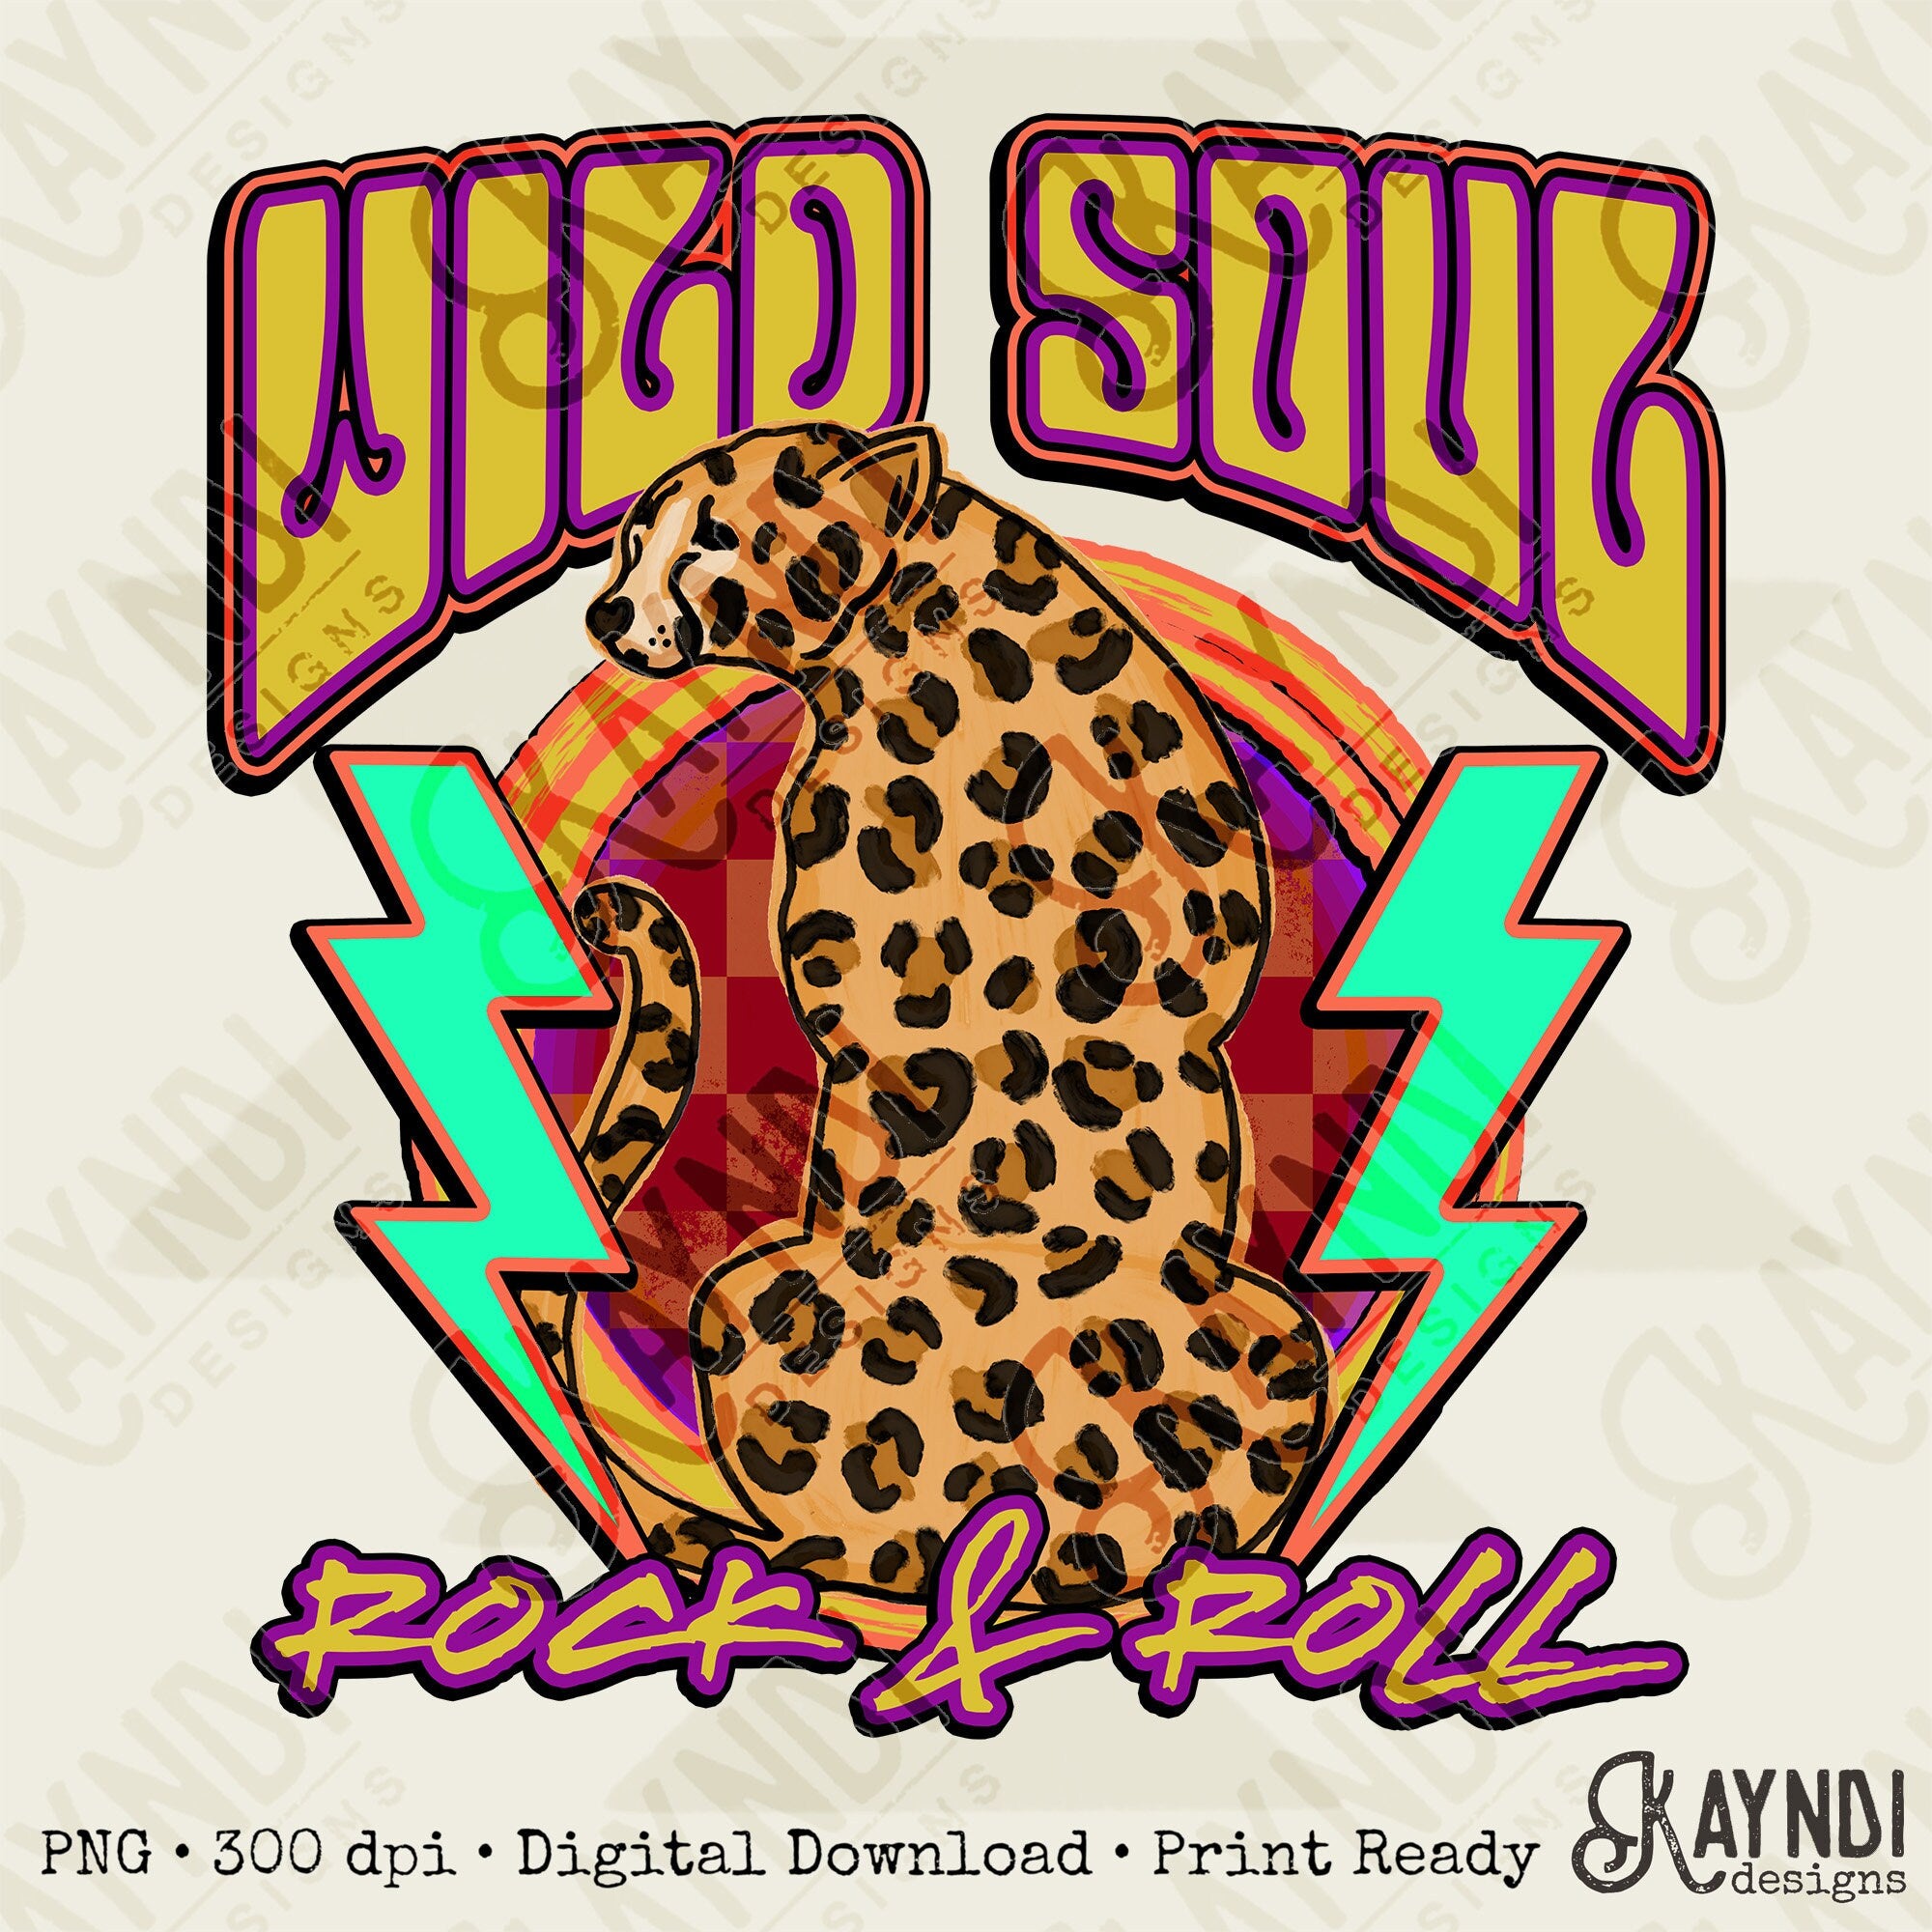 Wild Soul Rock & Roll Sublimation Design PNG Digital Download Printable Leopard Cheetah 70s 80s Rock Band Retro Groovy